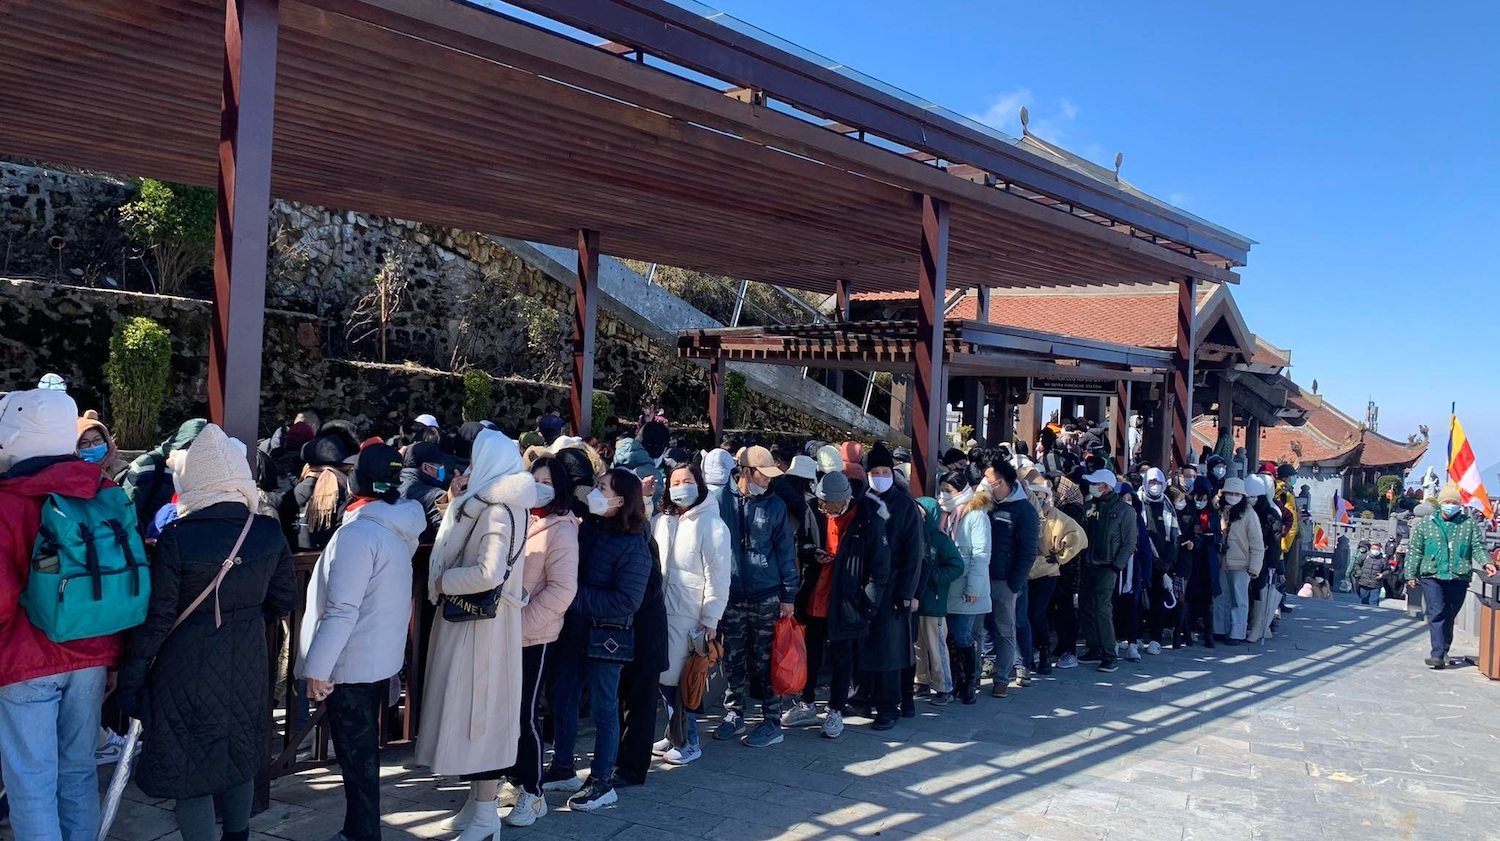 People wait in line to buy tickets for a train ride up mount Fansipan in Sa Pa, February 4, 2022. Photo by VnExpress/Trung Hieu